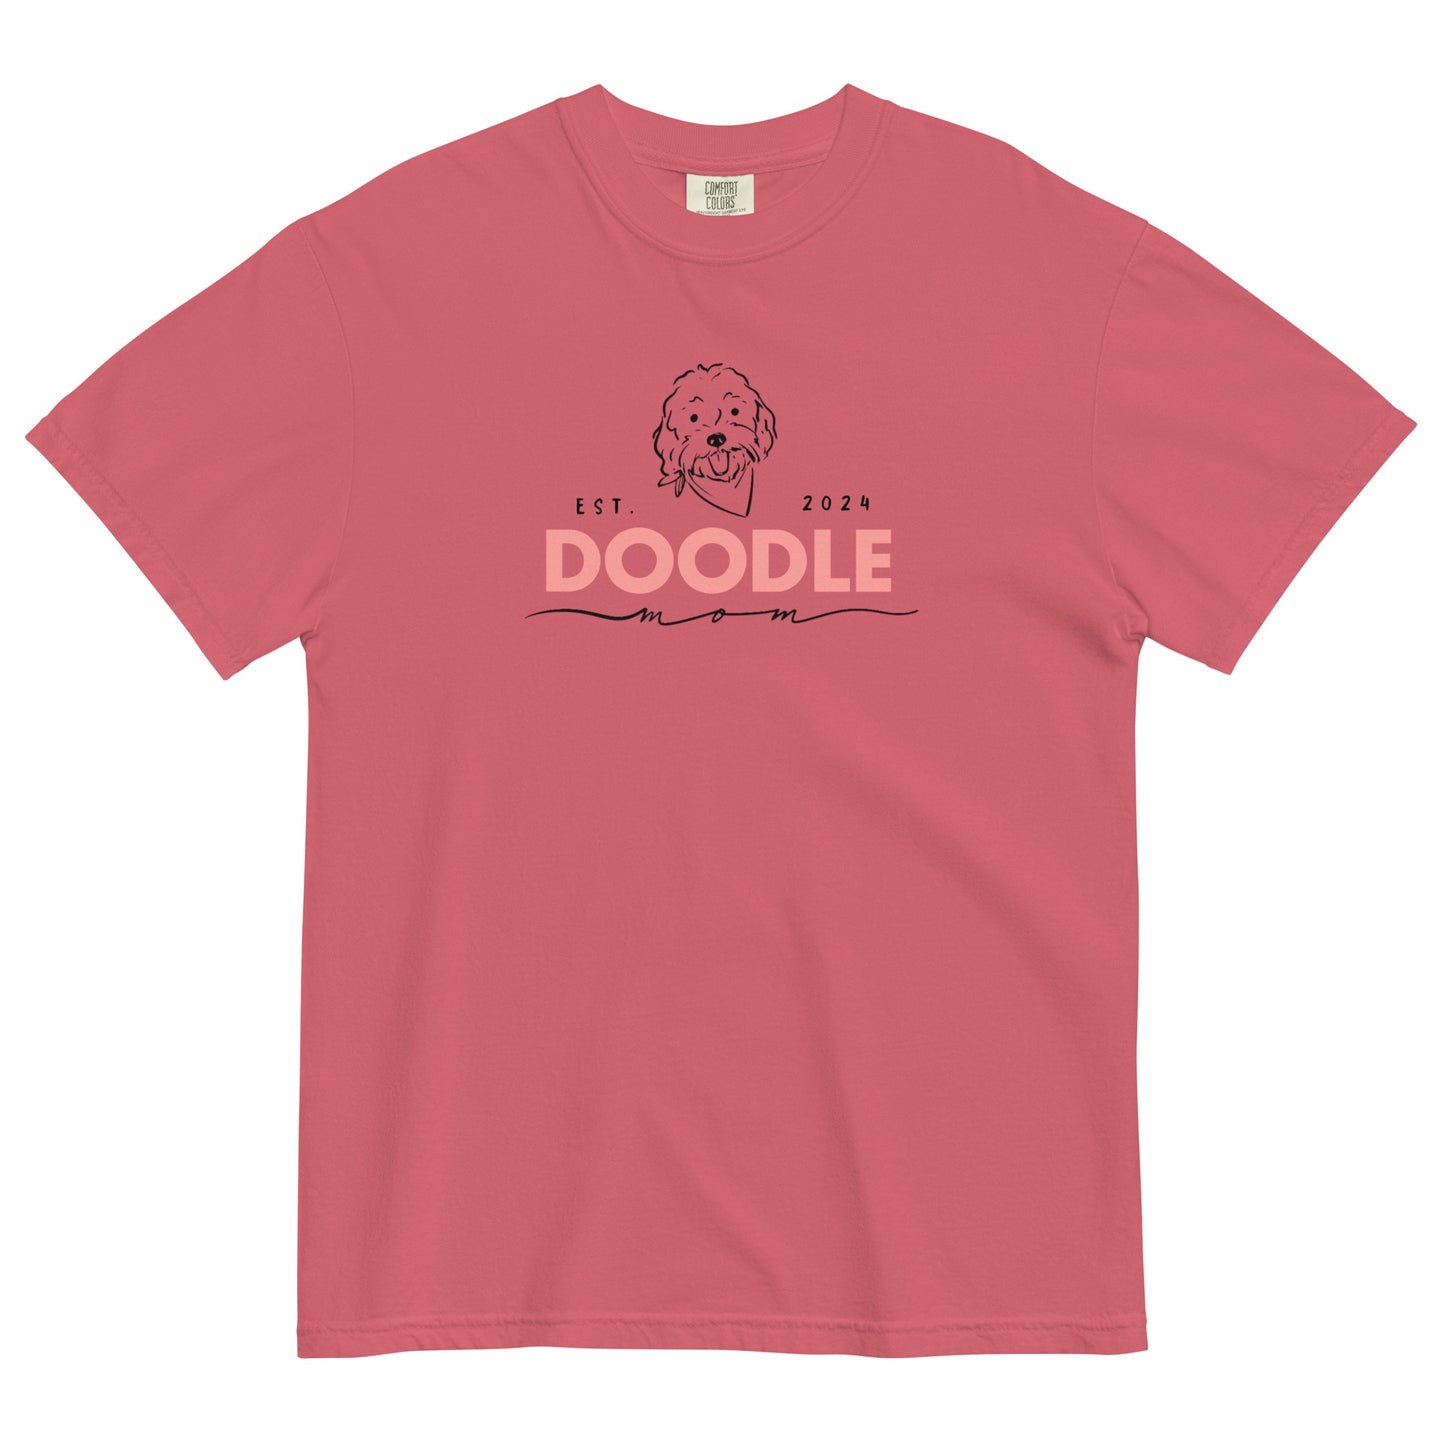 This Doodle T-shirt features the message, "Doodle Mom Est. 2024" with a cute Doodle dog's face printed on the front of a cozy T-Shirt. The tag inside the shirt says Comfort Colors